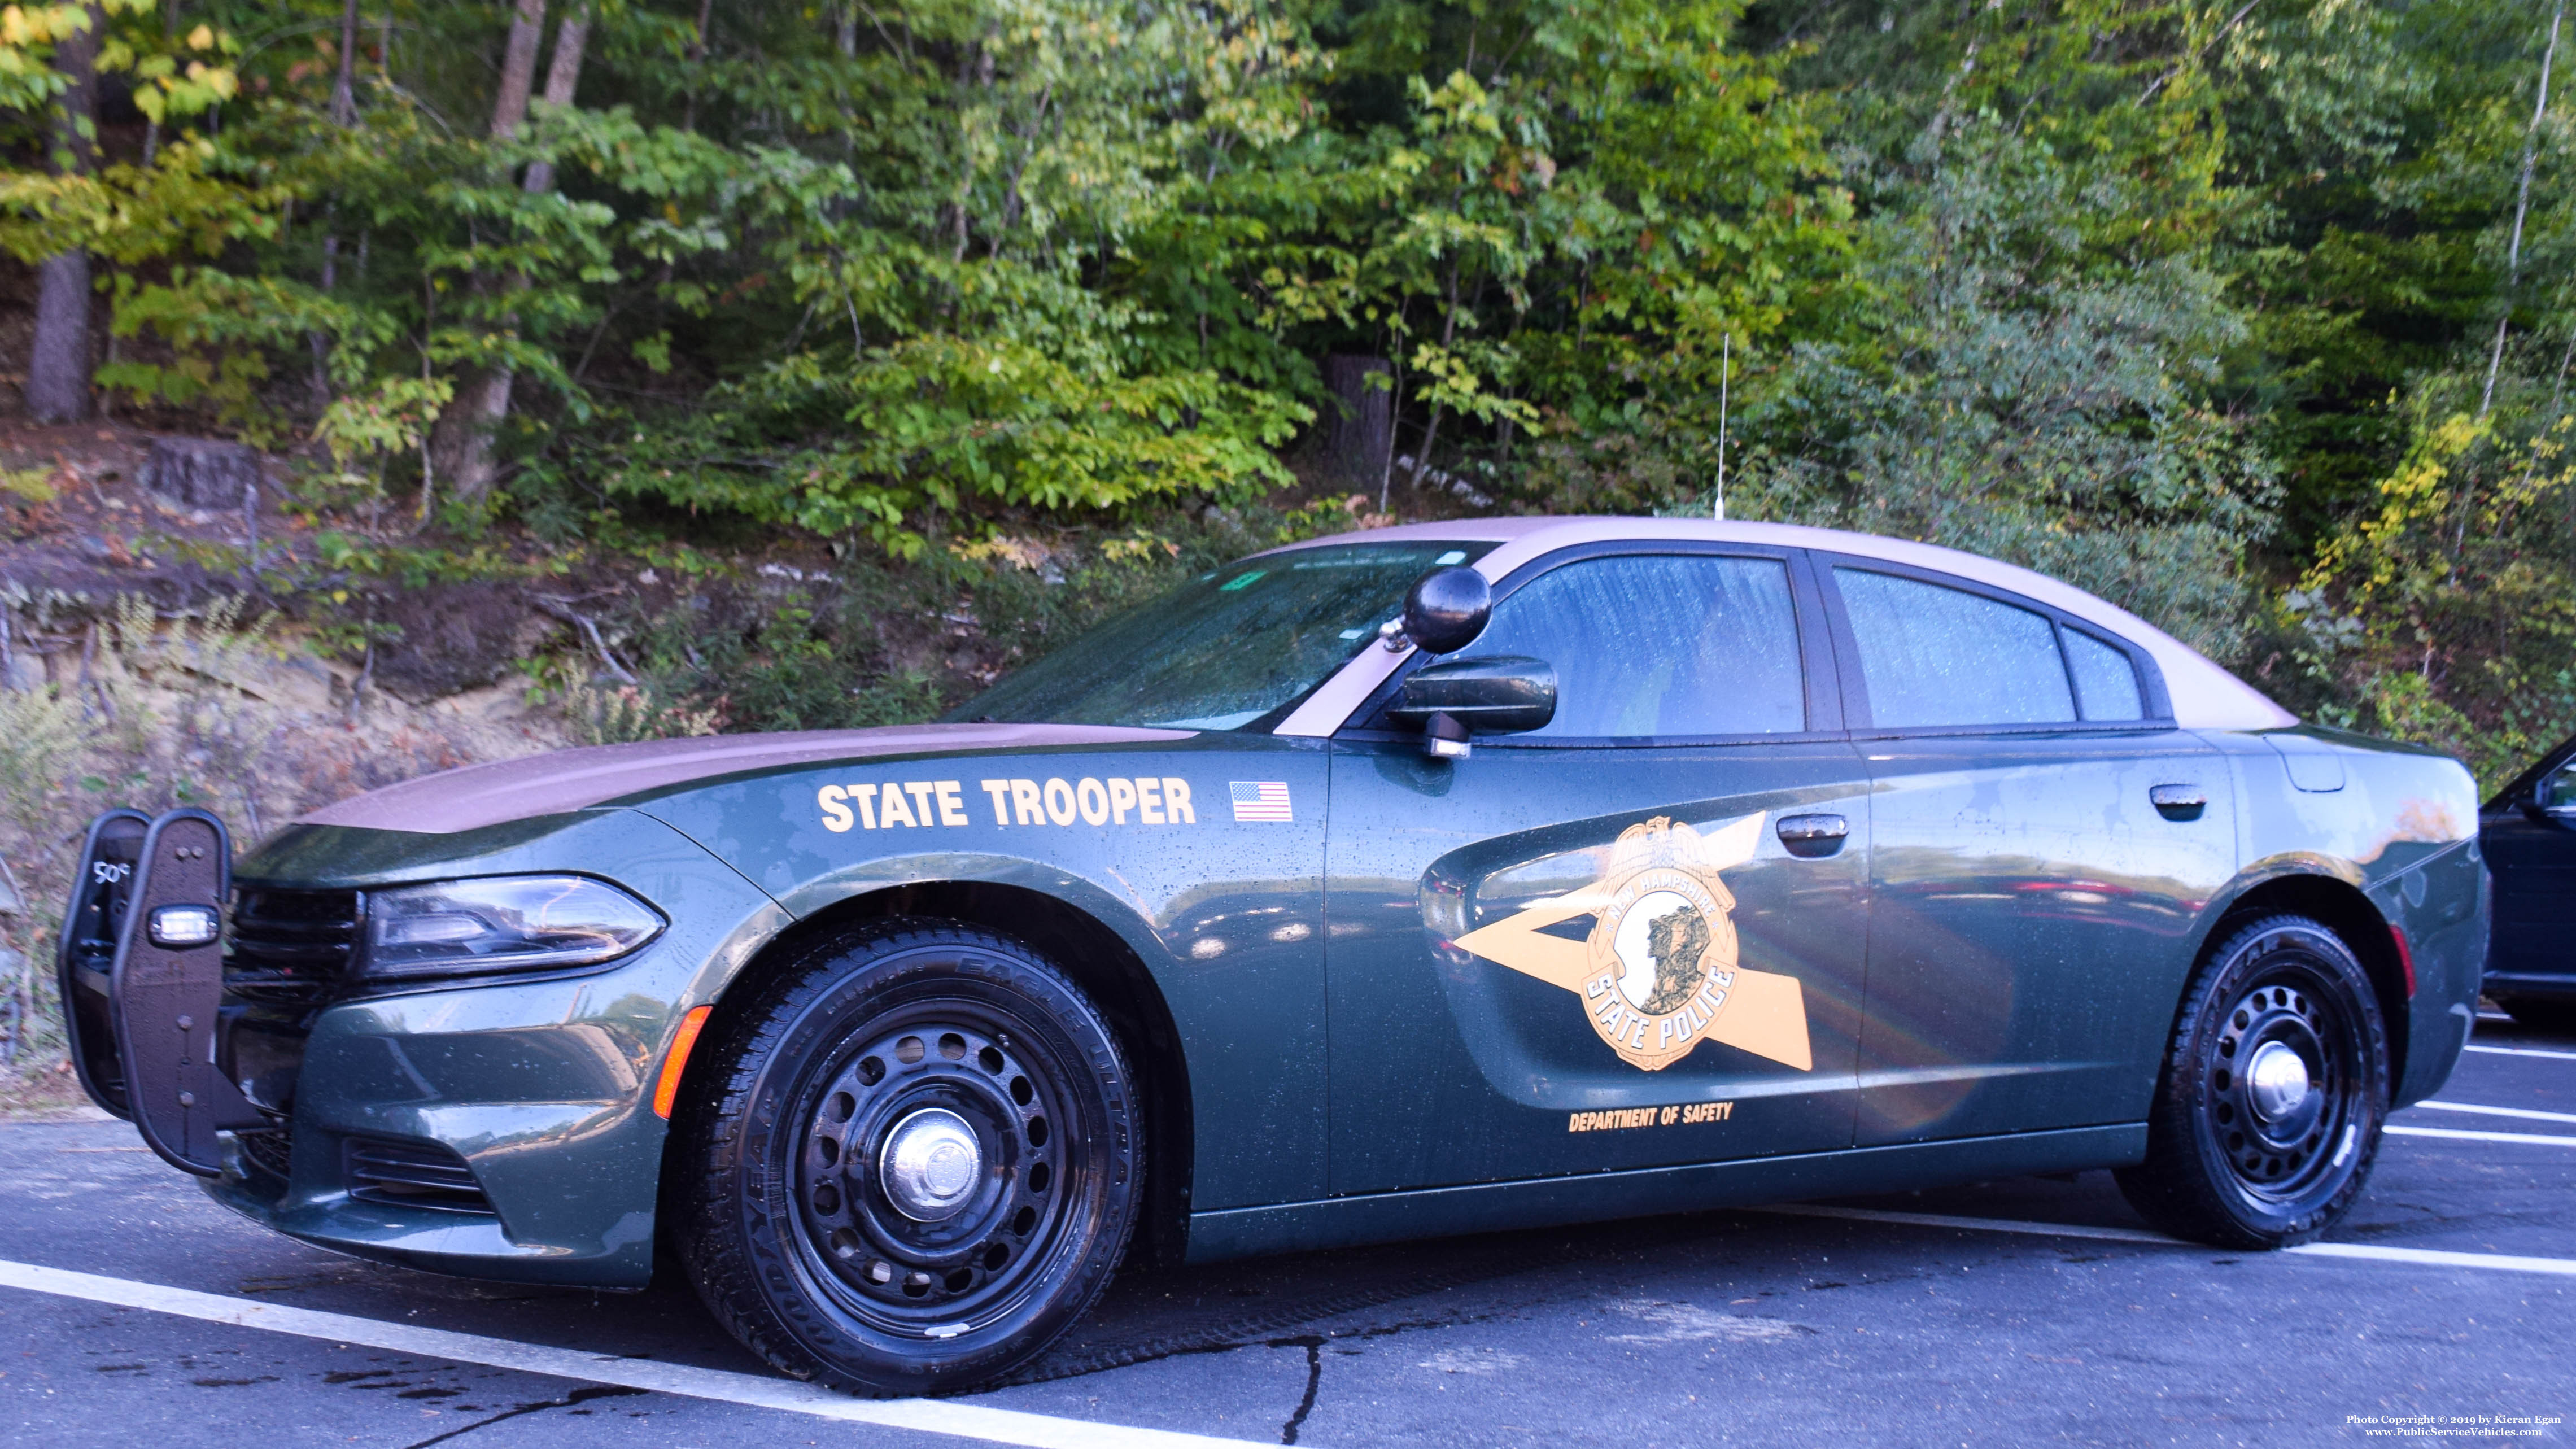 A photo  of New Hampshire State Police
            Cruiser 626, a 2015 Dodge Charger             taken by Kieran Egan